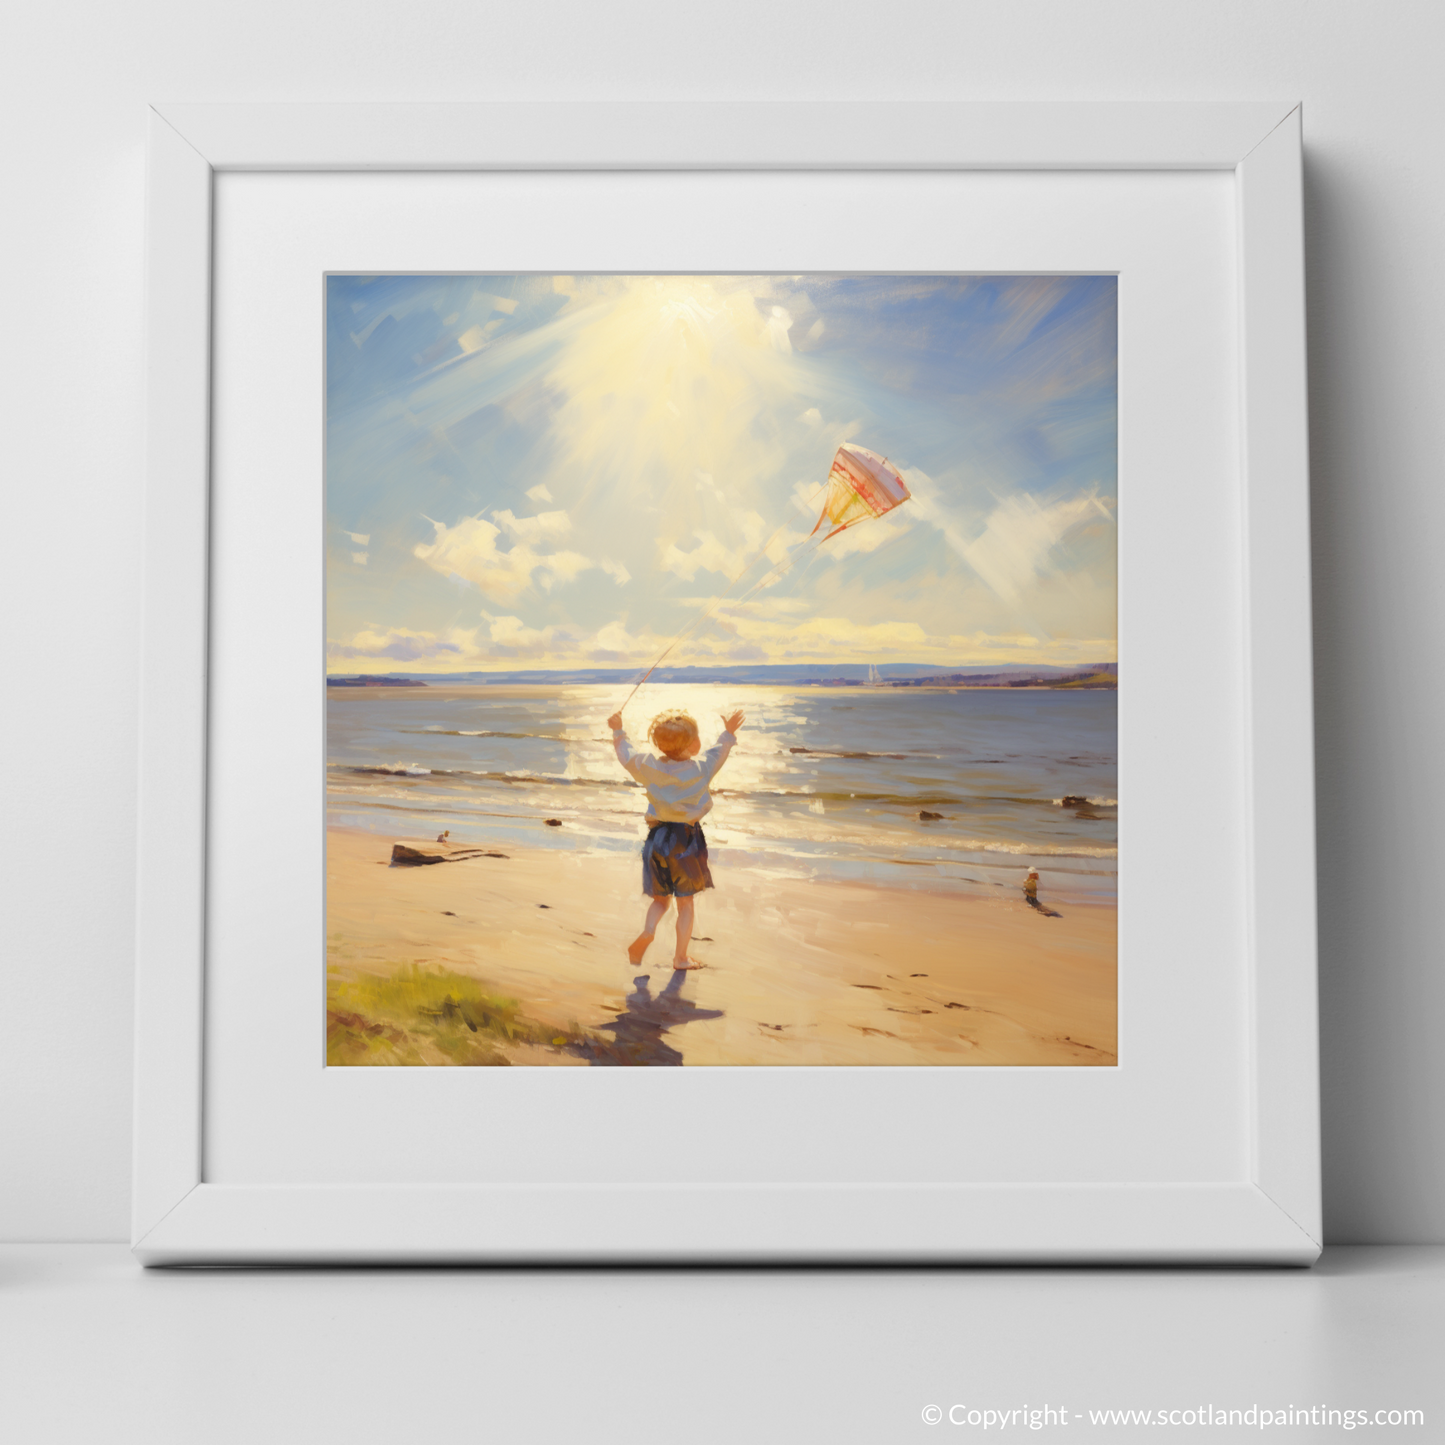 Art Print of A young boy flying a kite on the expansive shores of Nairn Beach, with the Moray Firth sparkling in the sunlight with a white frame